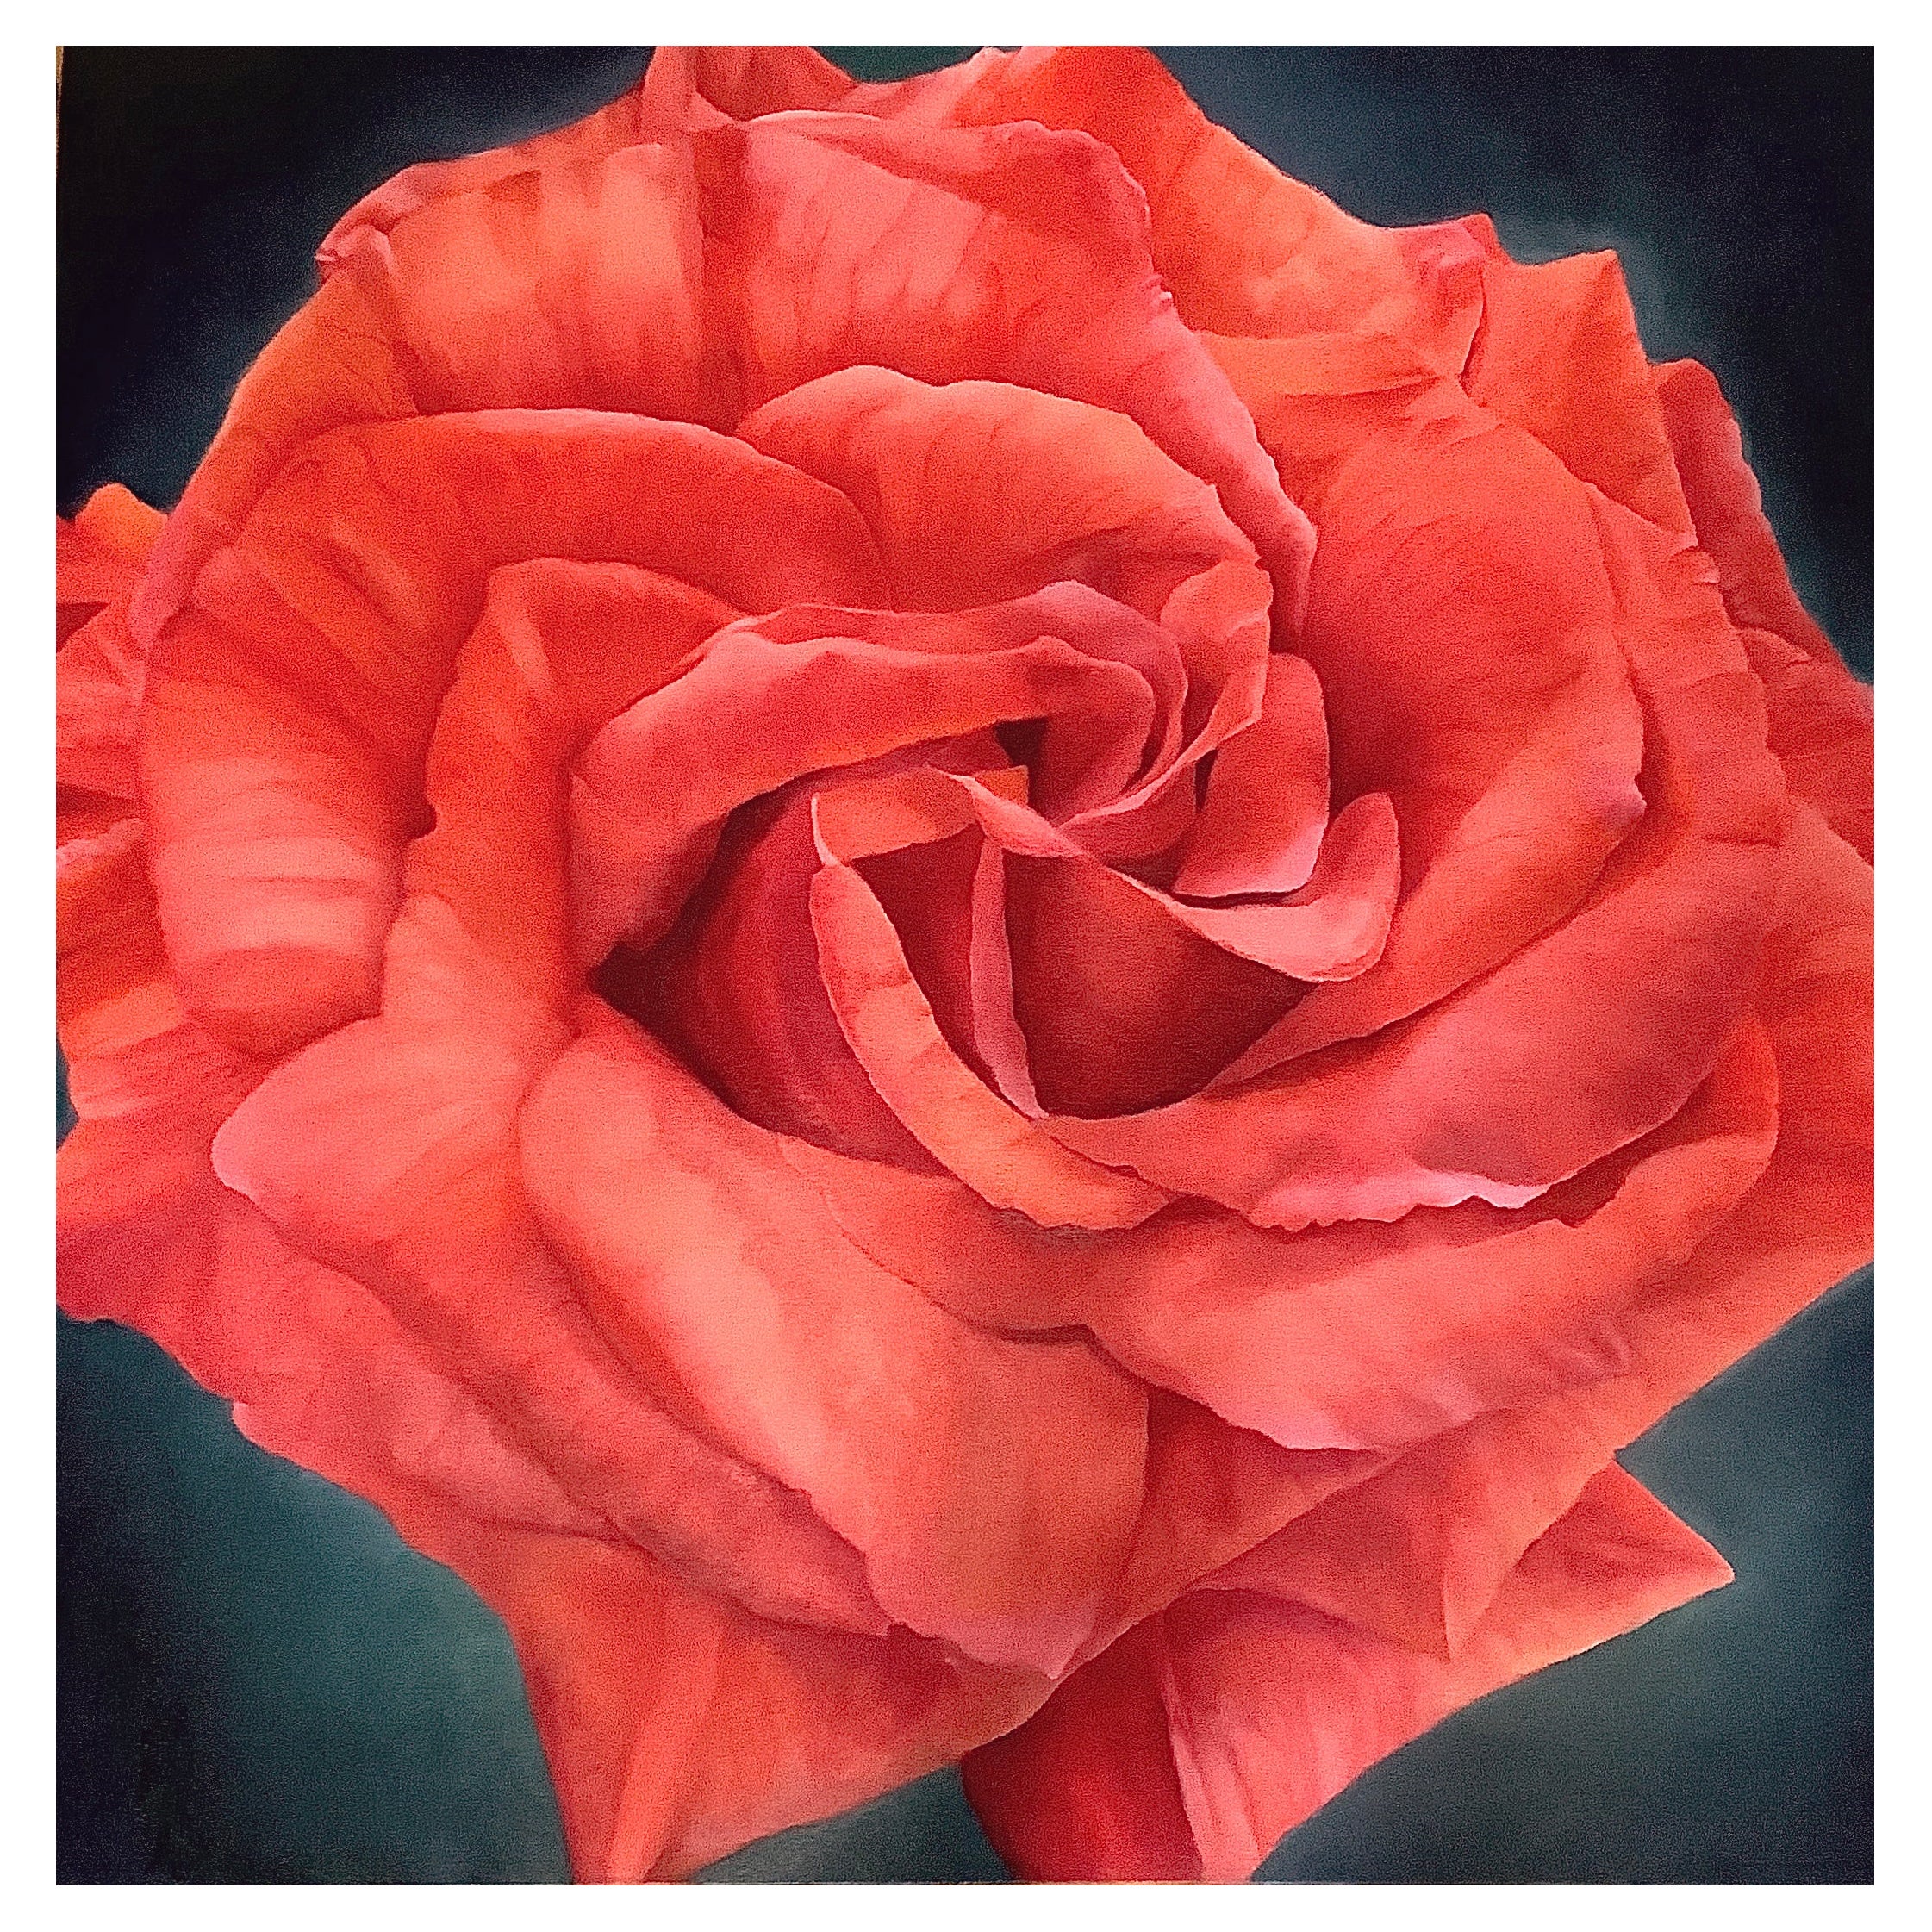 Framed Oil on Canvas "Corinna" - Salmon Color Rose by Shelly Gurton